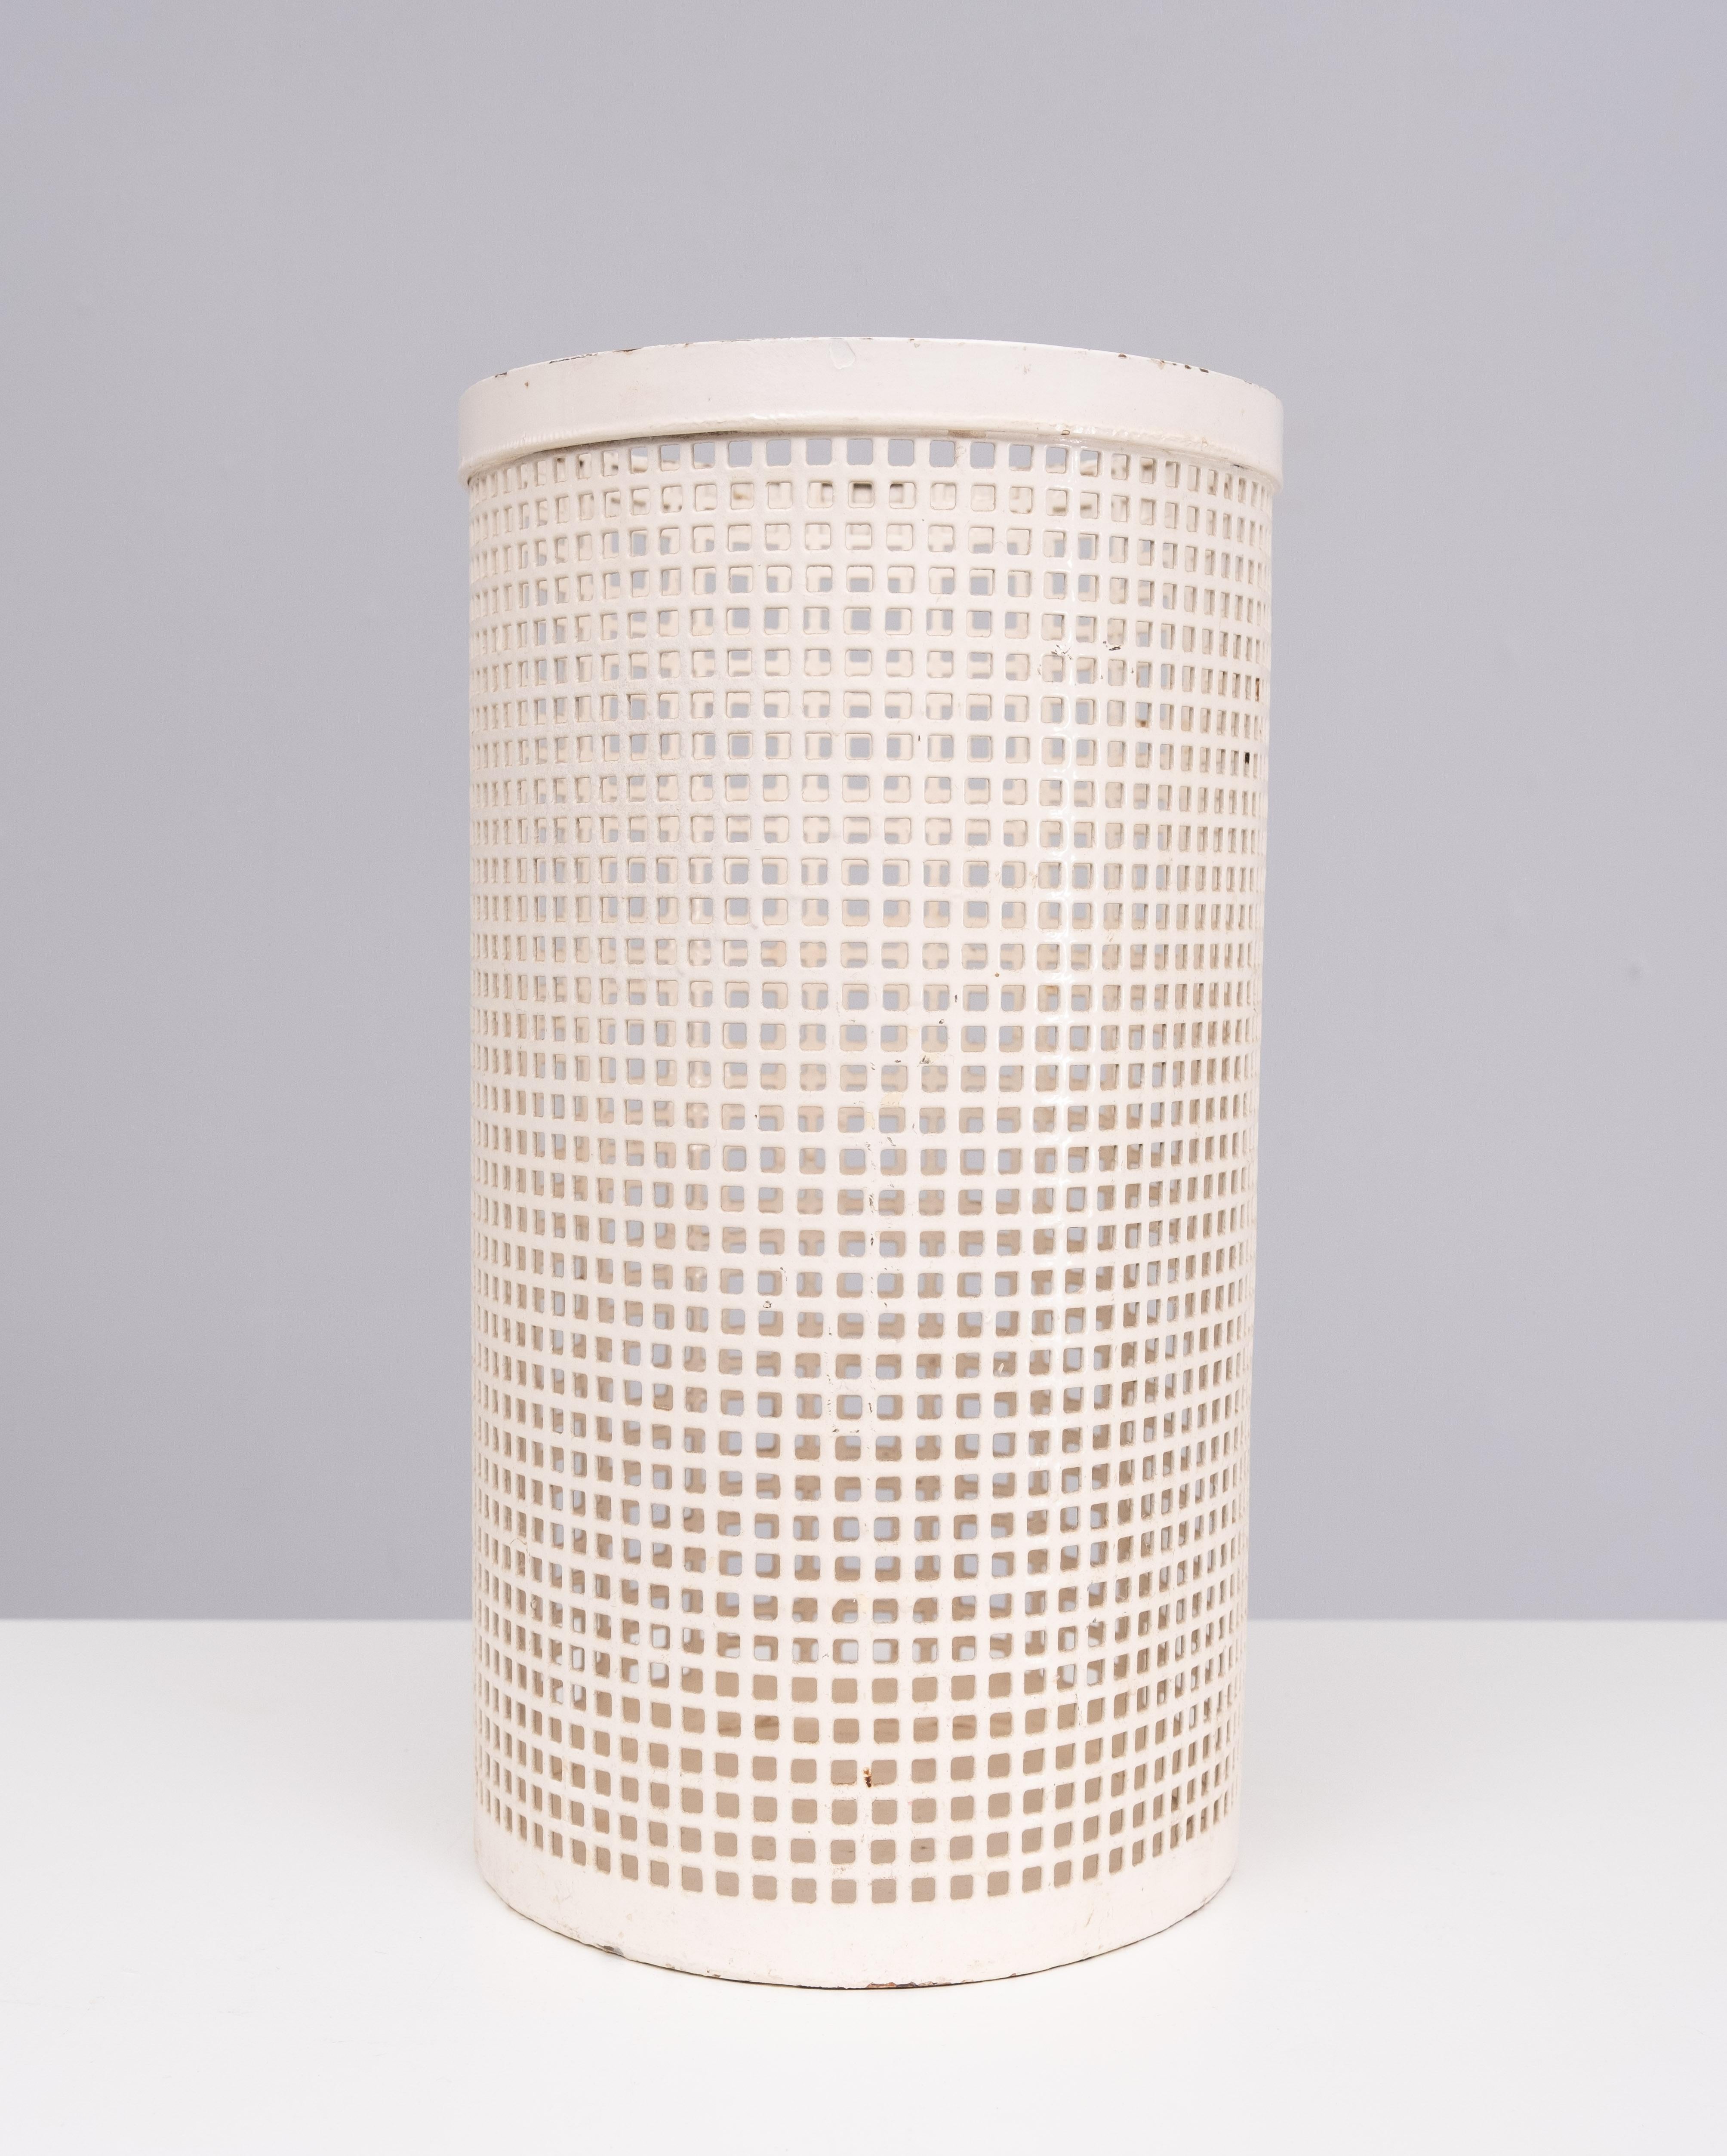 Perforated Metal Waste Basket 1950s France  In Good Condition For Sale In Den Haag, NL